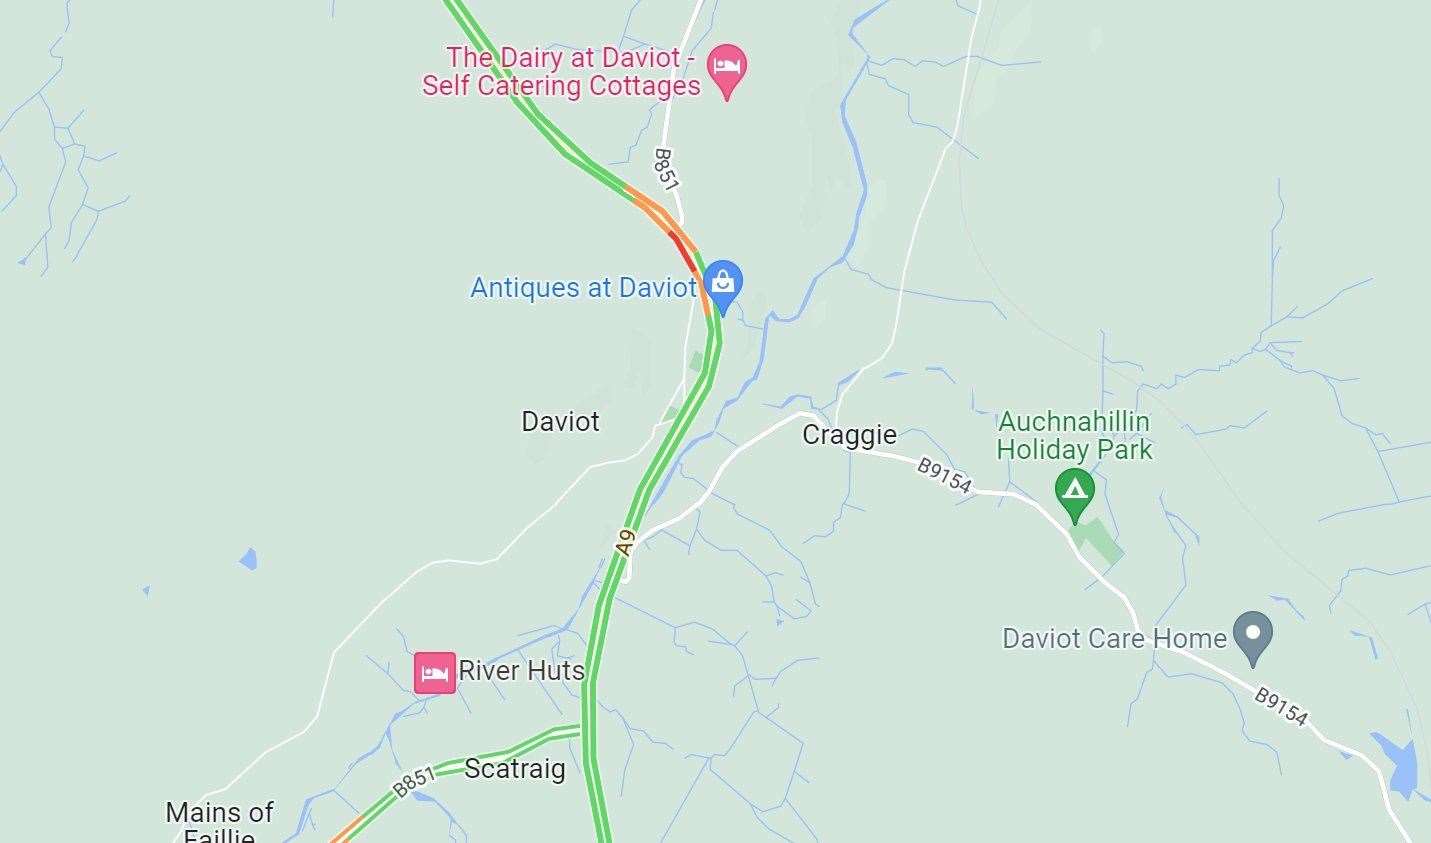 The crash occurred on the A9 near Daviot.